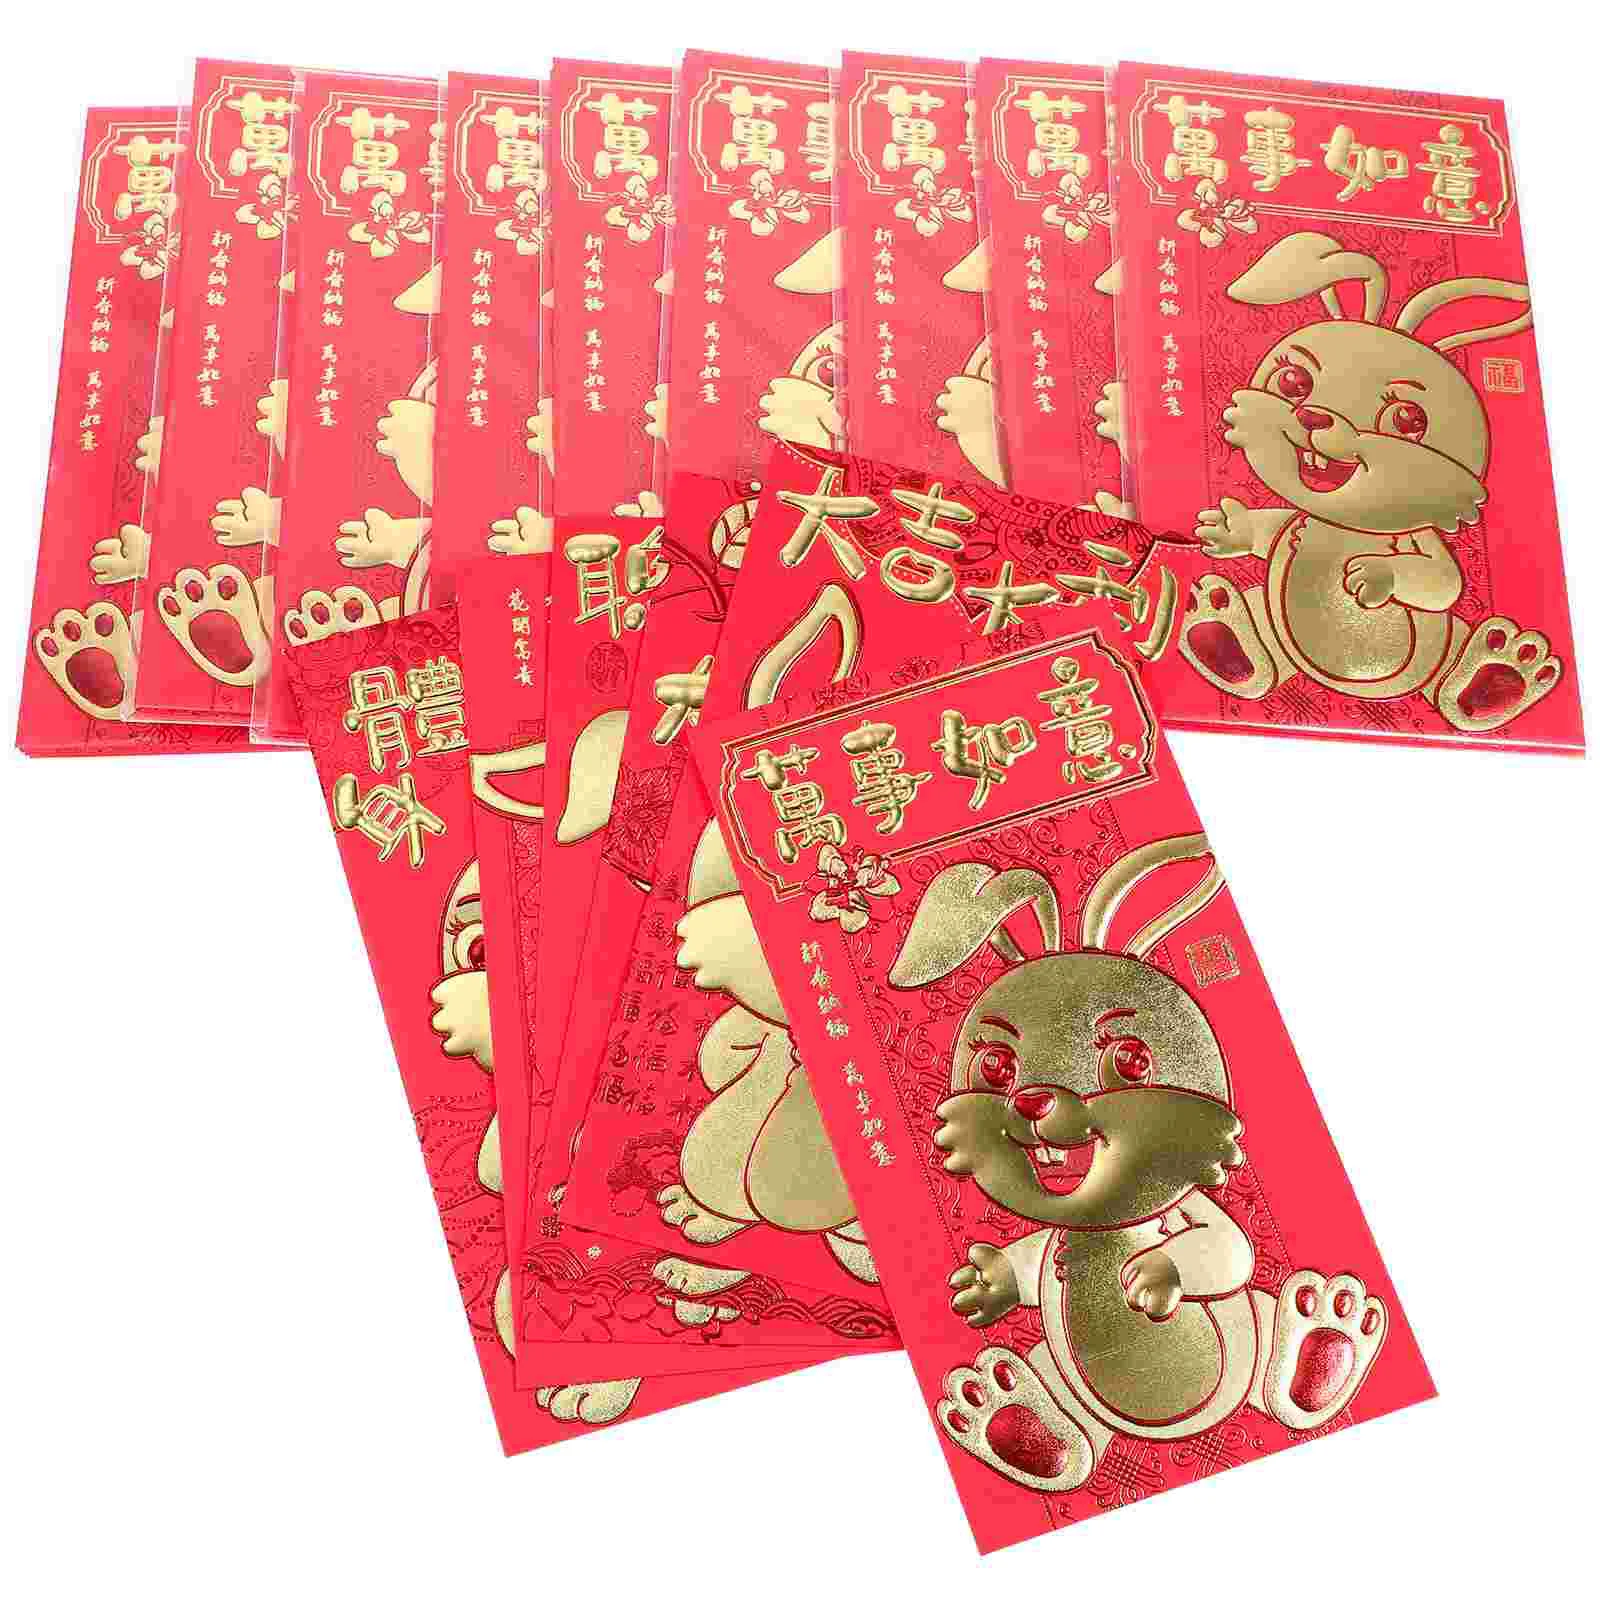 

Red Envelopes Money Year Chinese Envelope Packet New Rabbit Packets Festival Spring Wedding Hong Pocket Bao Luck Bunny Lucky The